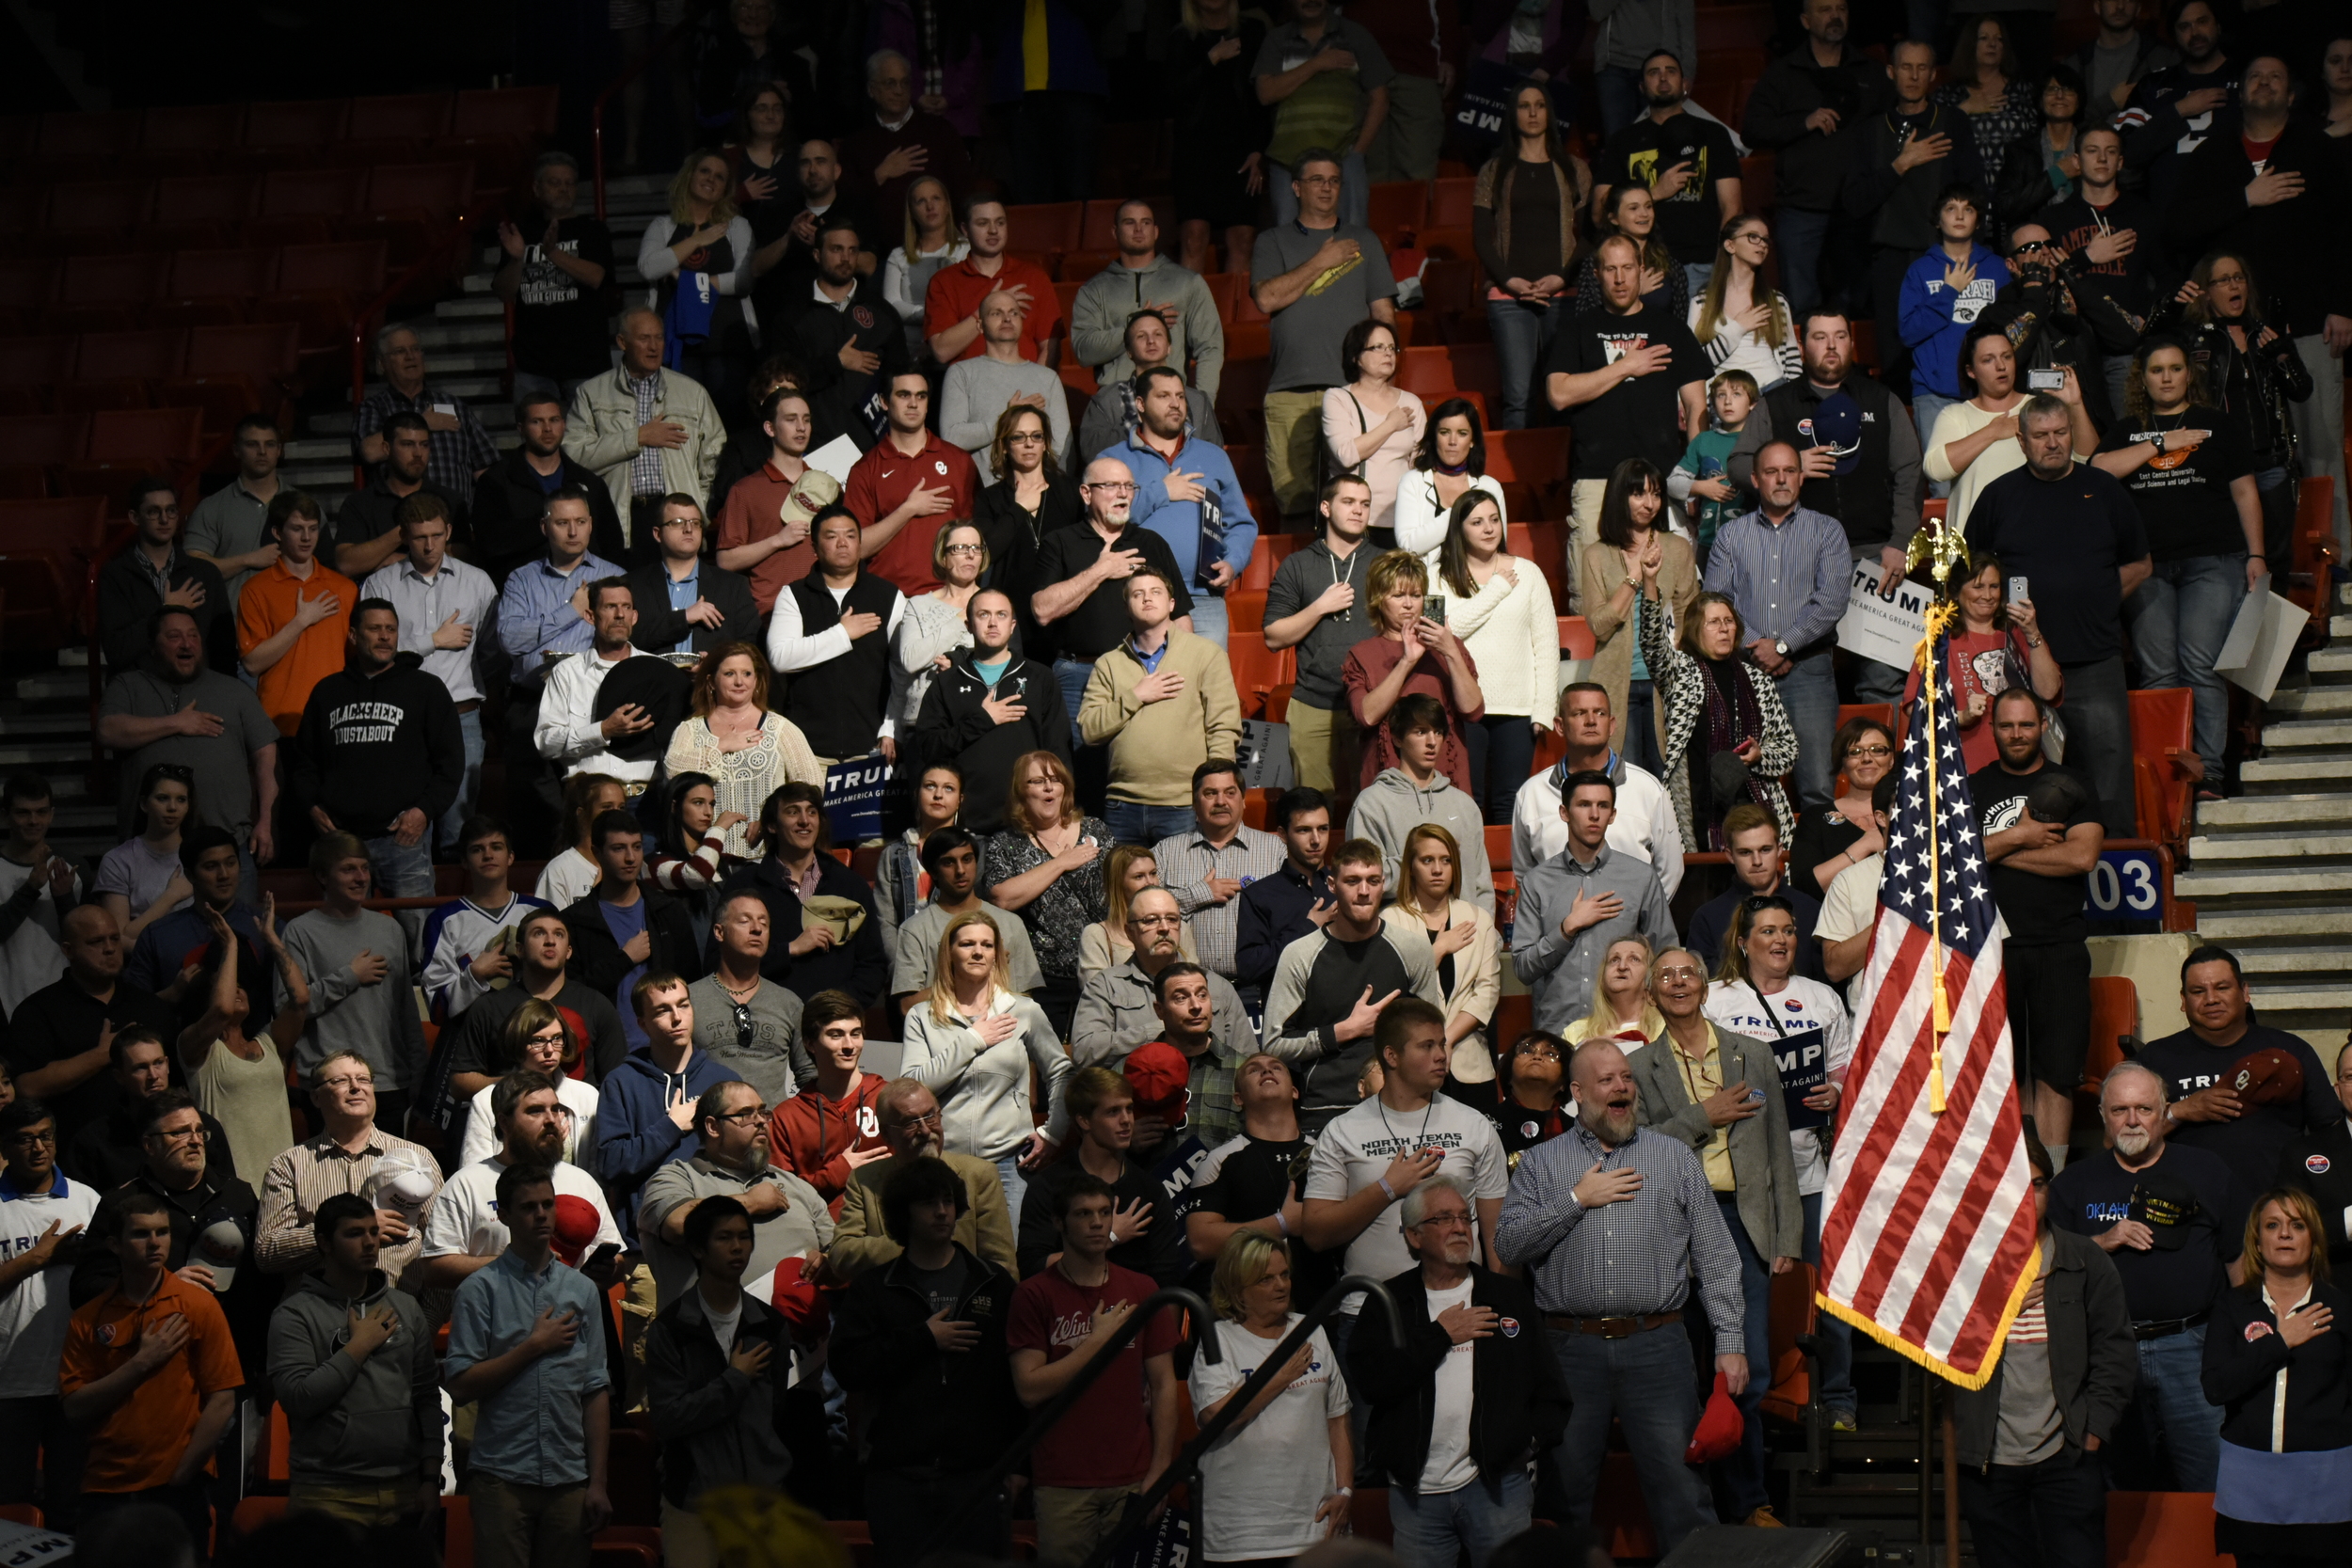   Supporters recite the Pledge of Allegiance at a rally for Republican U.S. presidential candidate Donald Trump in Oklahoma City, Oklahoma February 26, 2016. REUTERS/Nick Oxford  